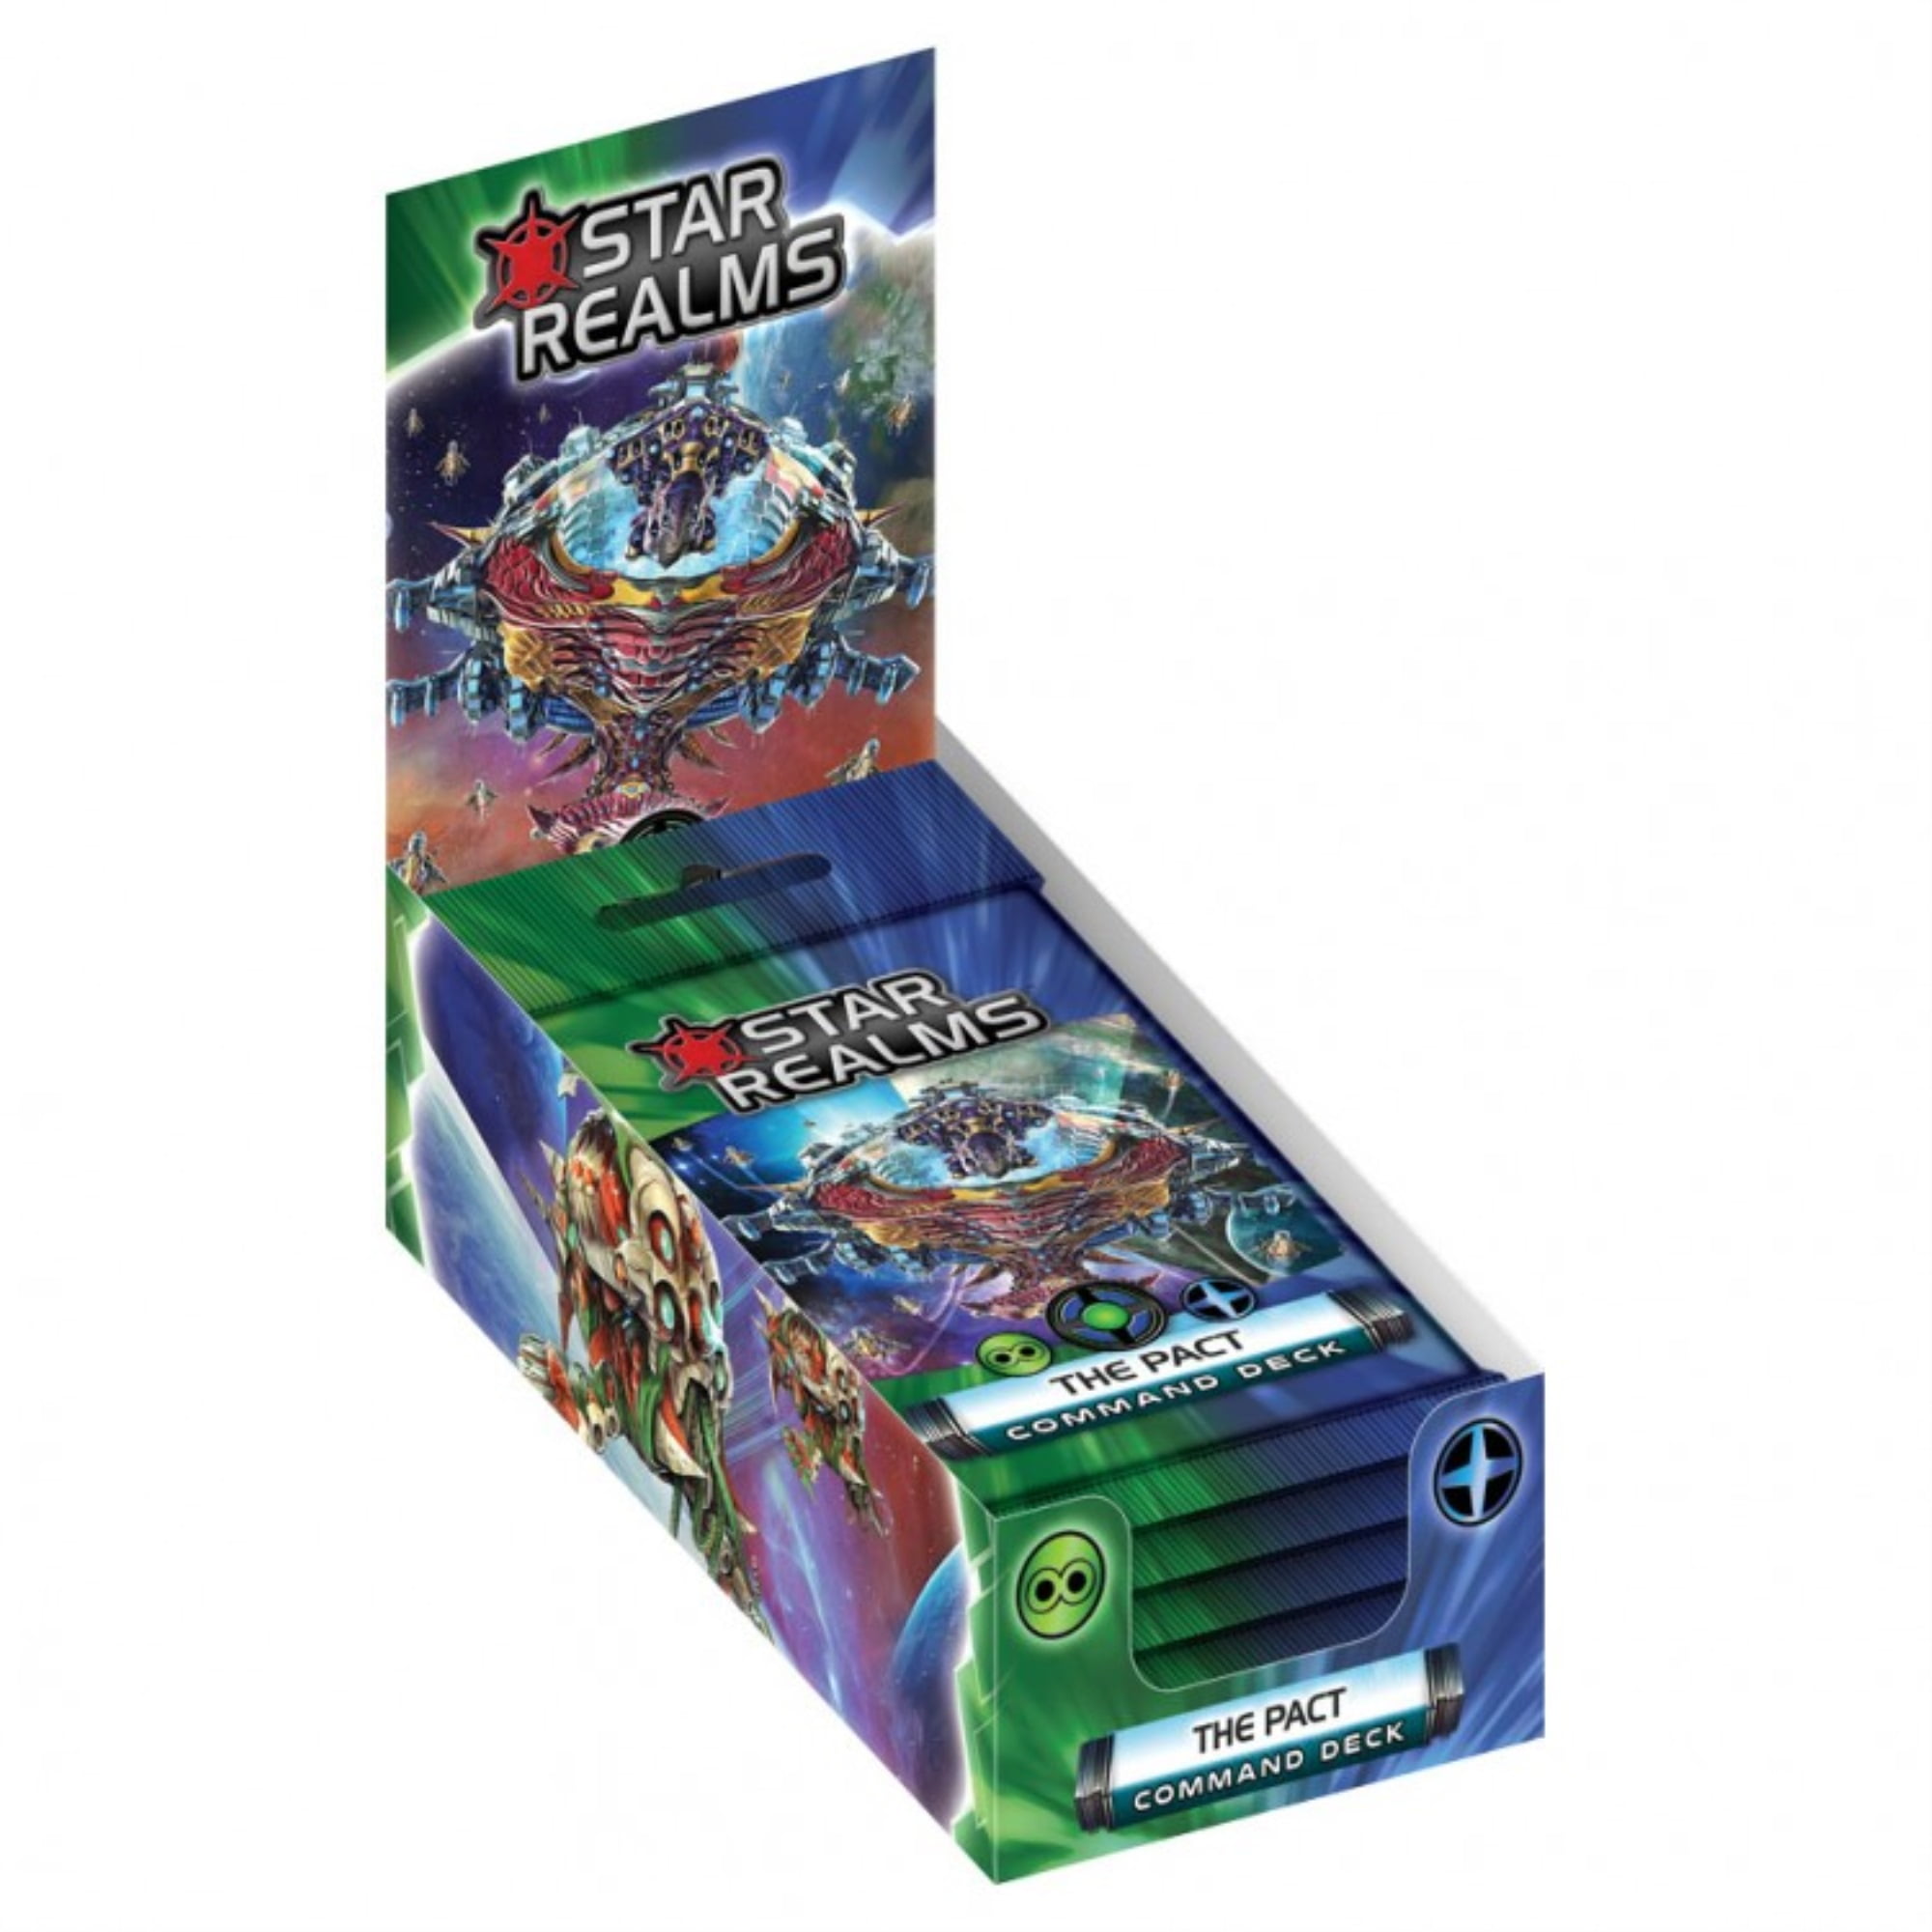 Wwg026d Star Realms Command Decks Pact Display Card Game